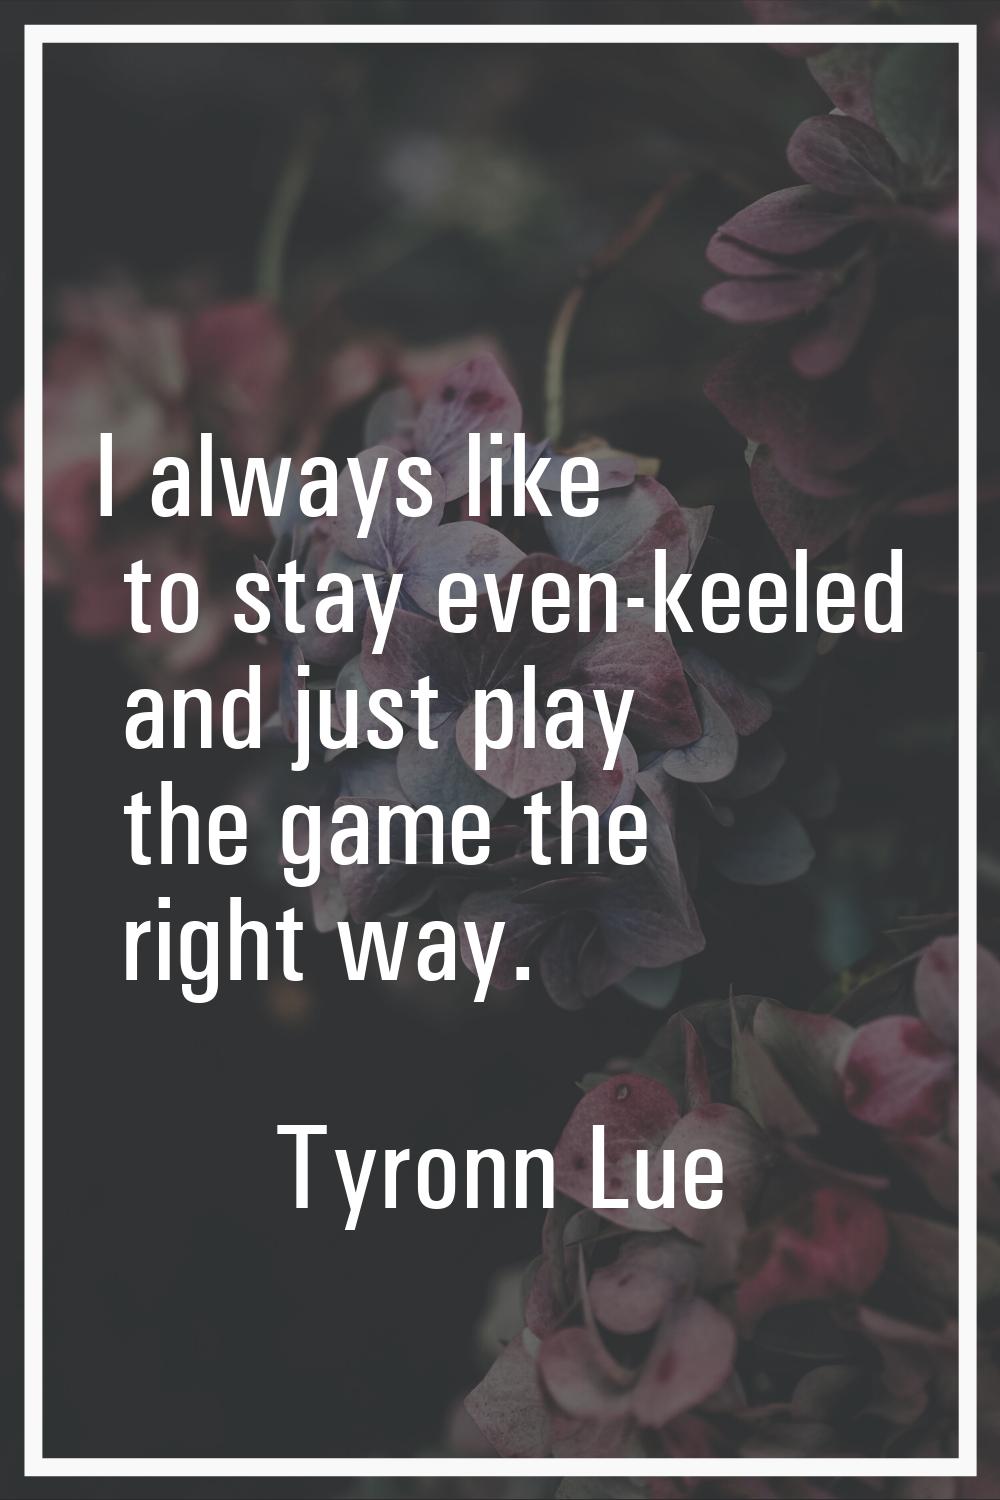 I always like to stay even-keeled and just play the game the right way.